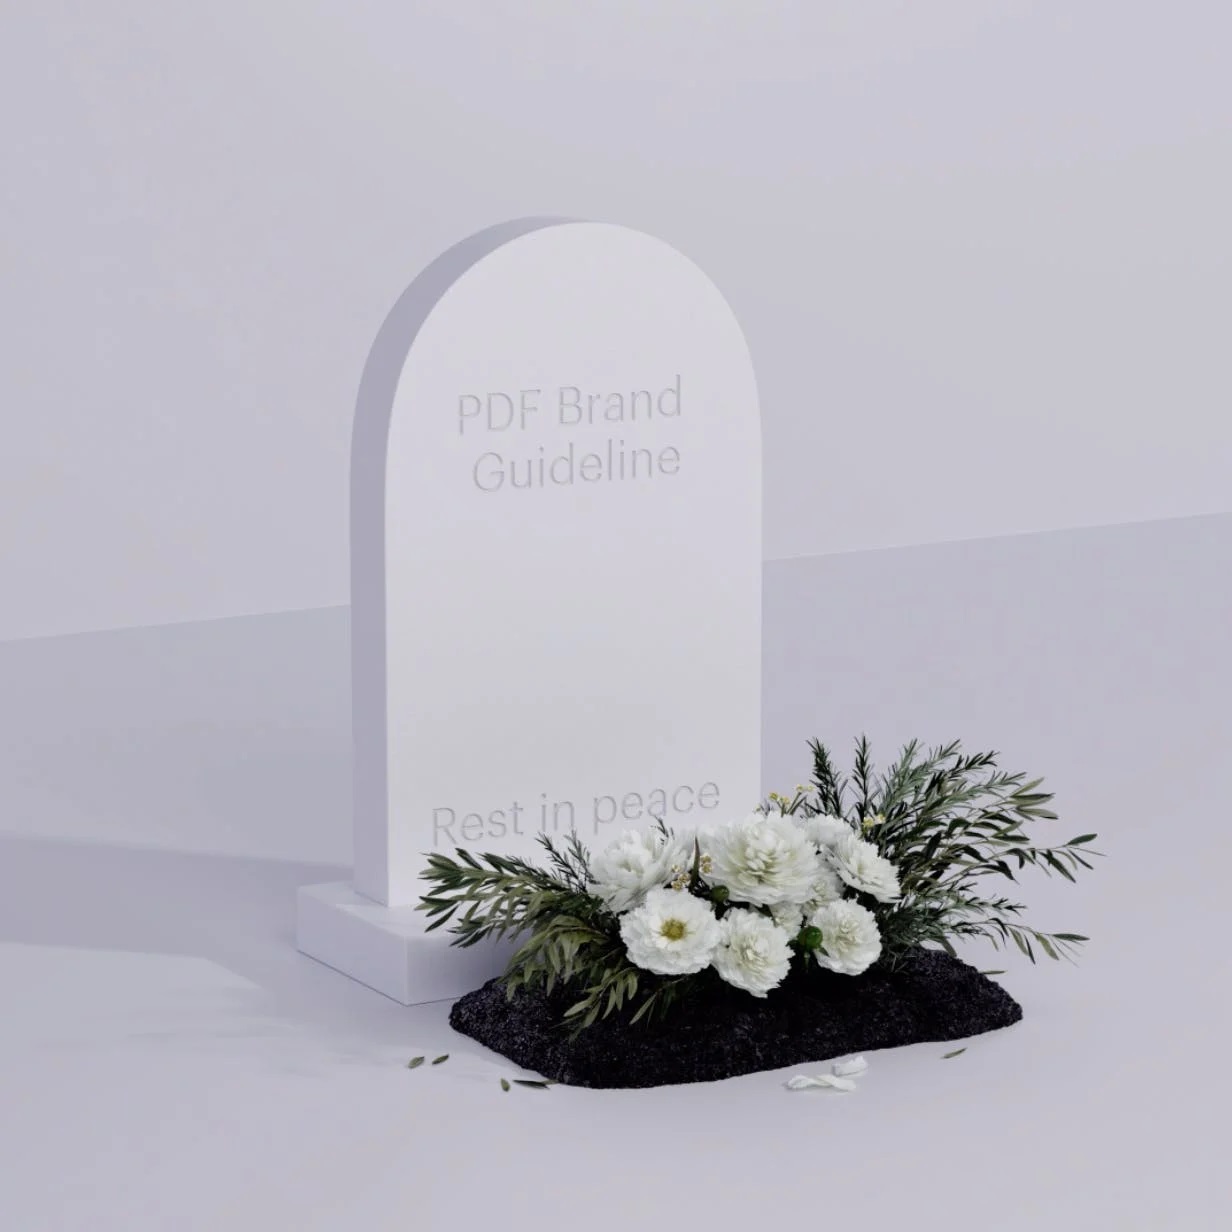 Fashion Product Sourcing: The PDF Brand Guide is dead | Product World